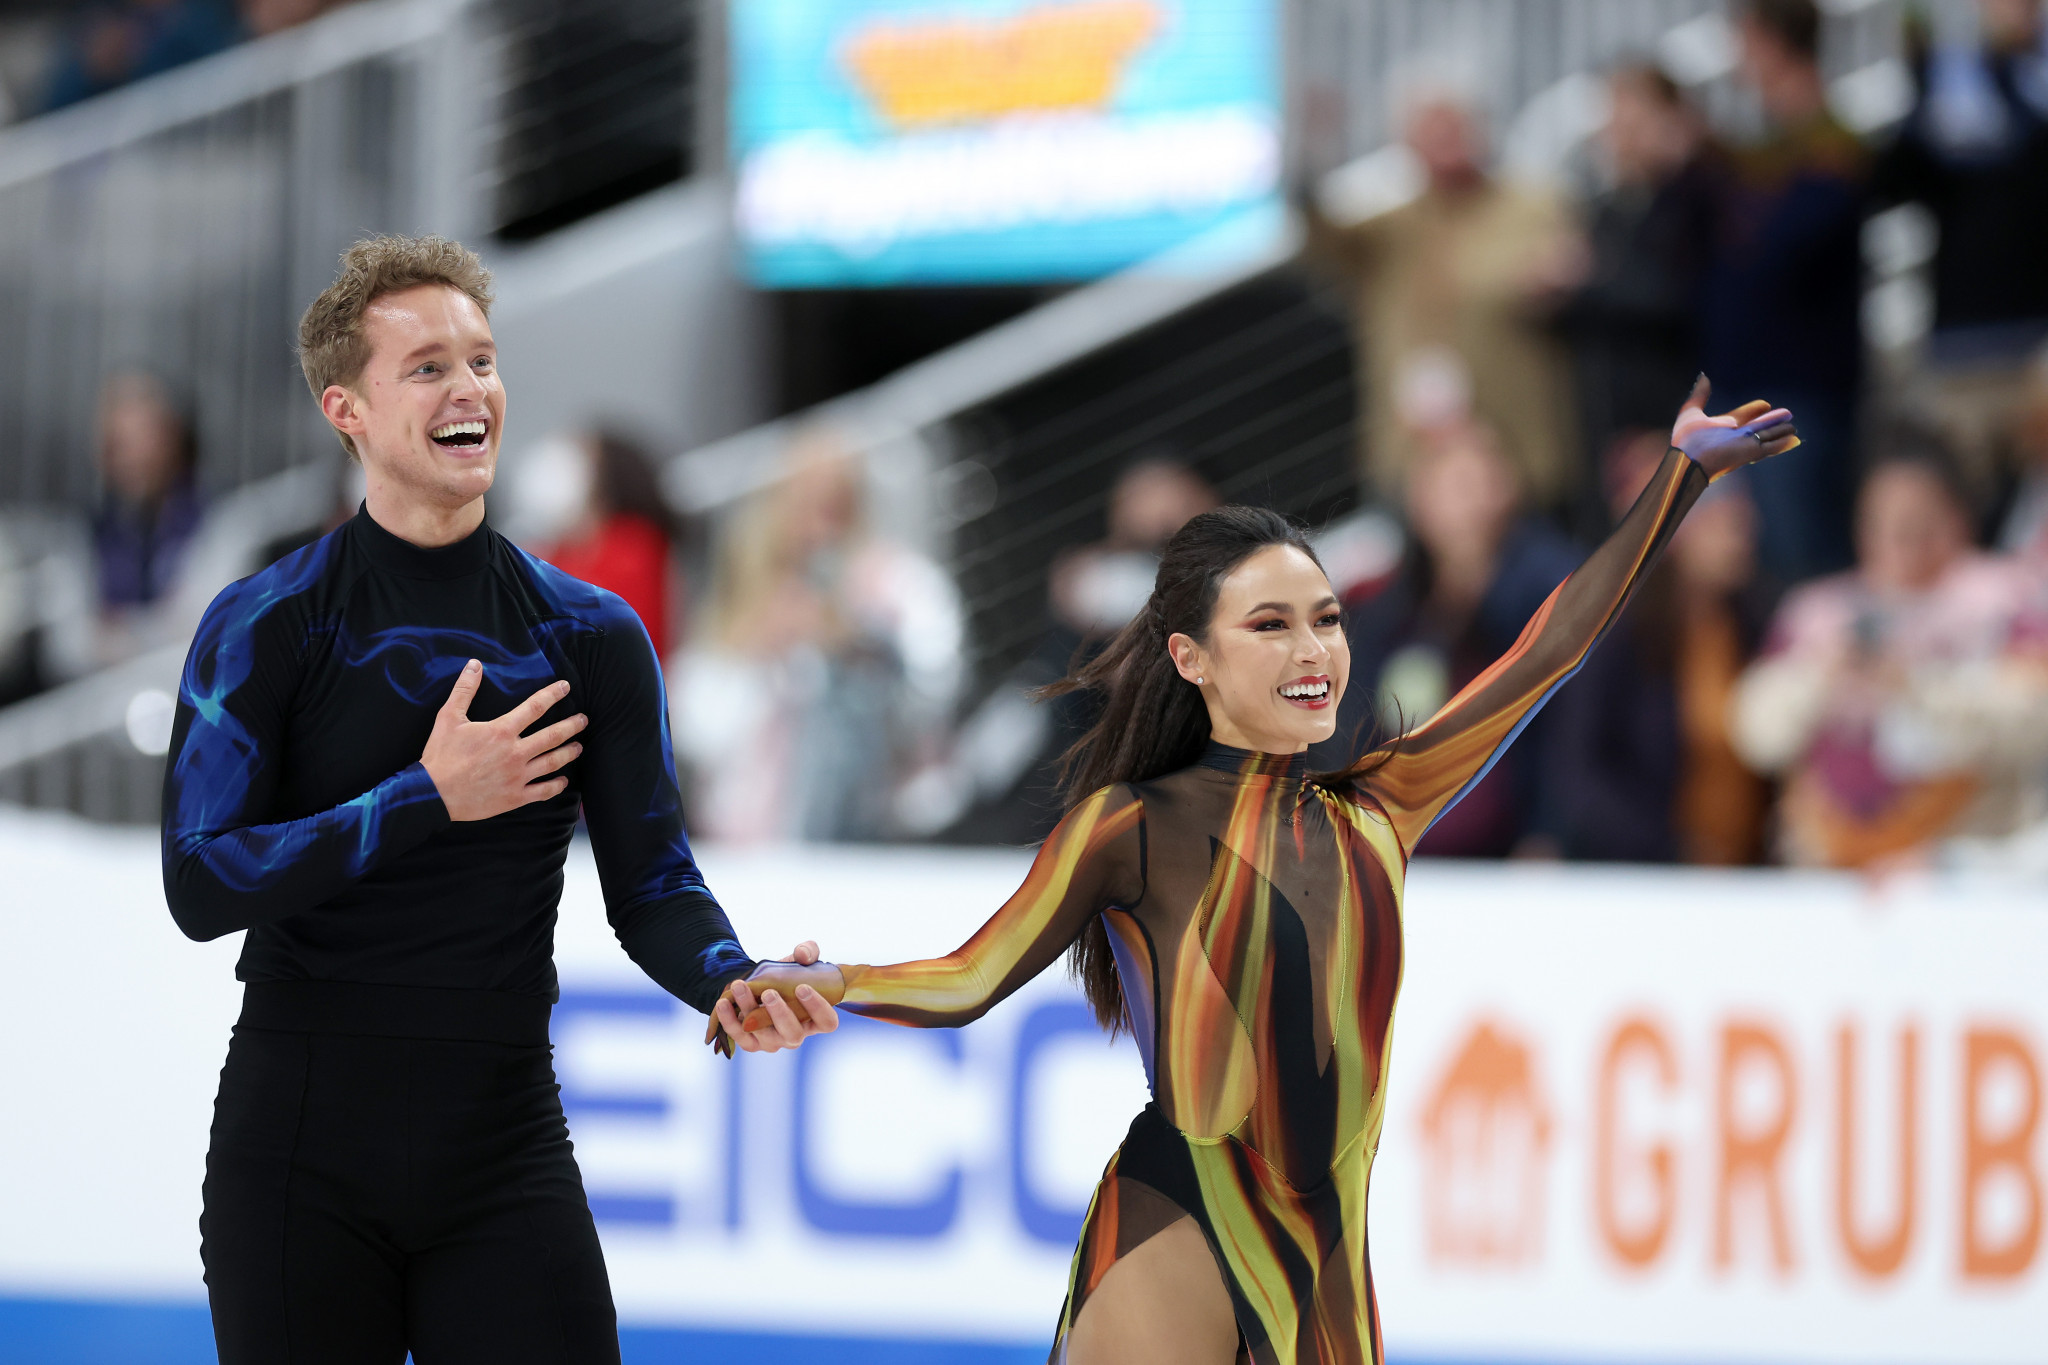 Chock and Bates provide home joy as Four Continents Figure Skating Championships concludes 